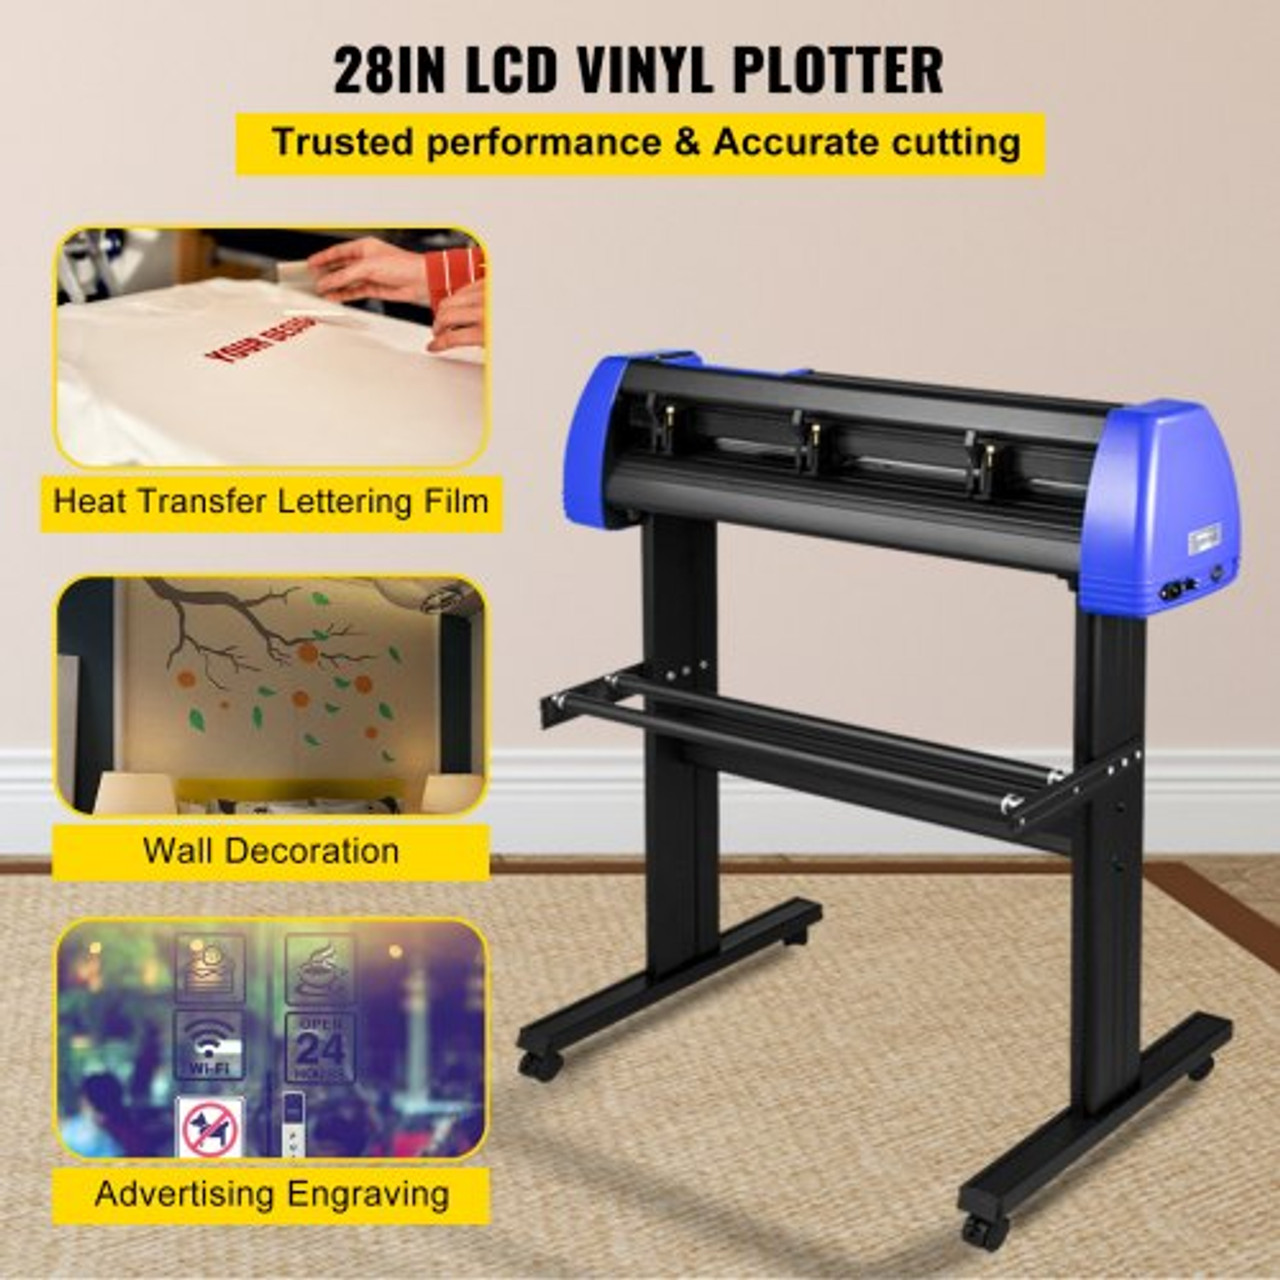 Vinyl Cutter 34 Inch Vinyl Cutter Machine with 20 Blades Maximum Paper Feed 870mm Vinyl Plotter Cutter Machine with Sturdy Floor Stand Adjustable Force and Speed for Sign Making PC ONLY